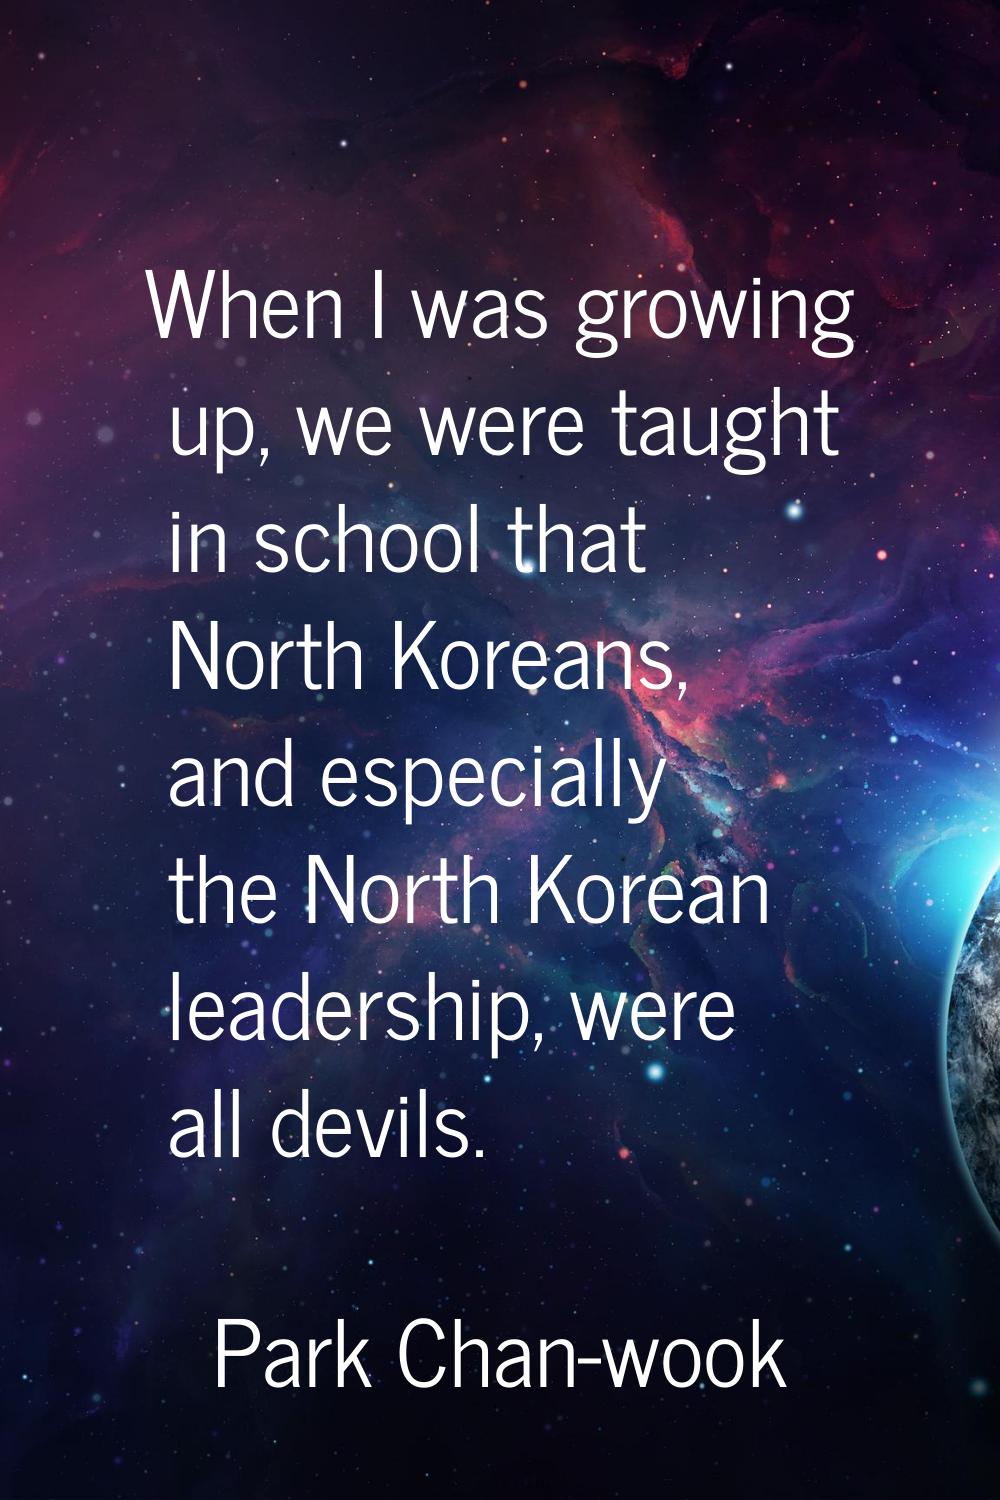 When I was growing up, we were taught in school that North Koreans, and especially the North Korean